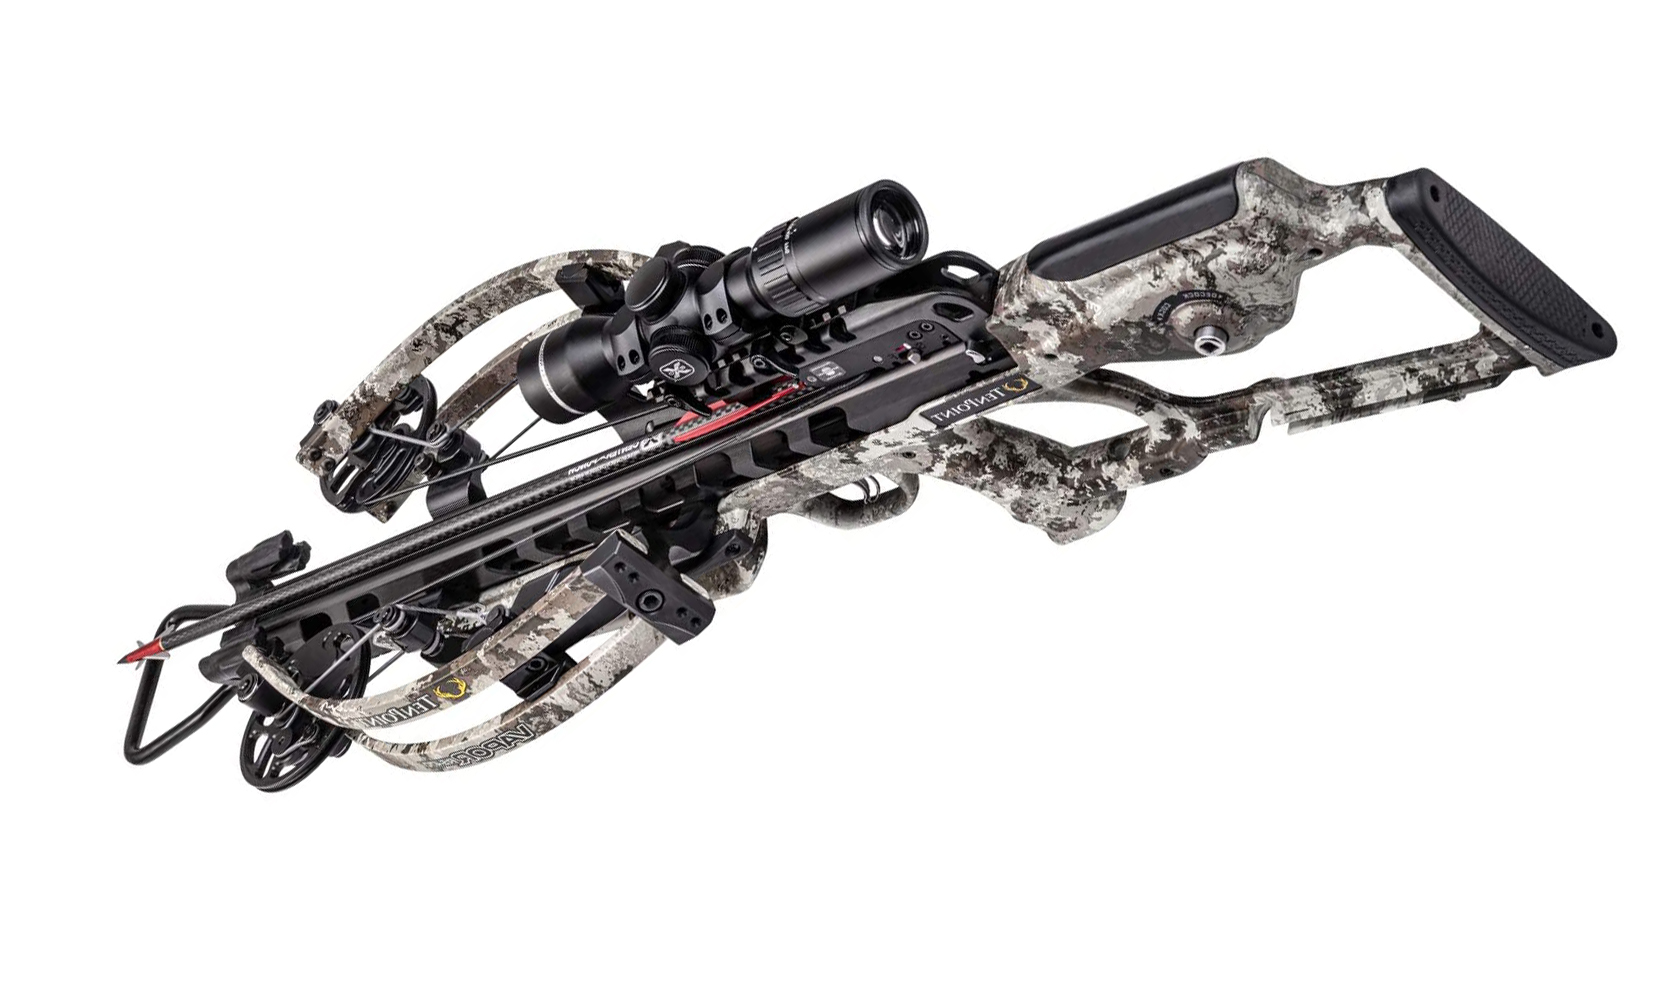 Vapor RS470 reverse-draw crossbow by TenPoint